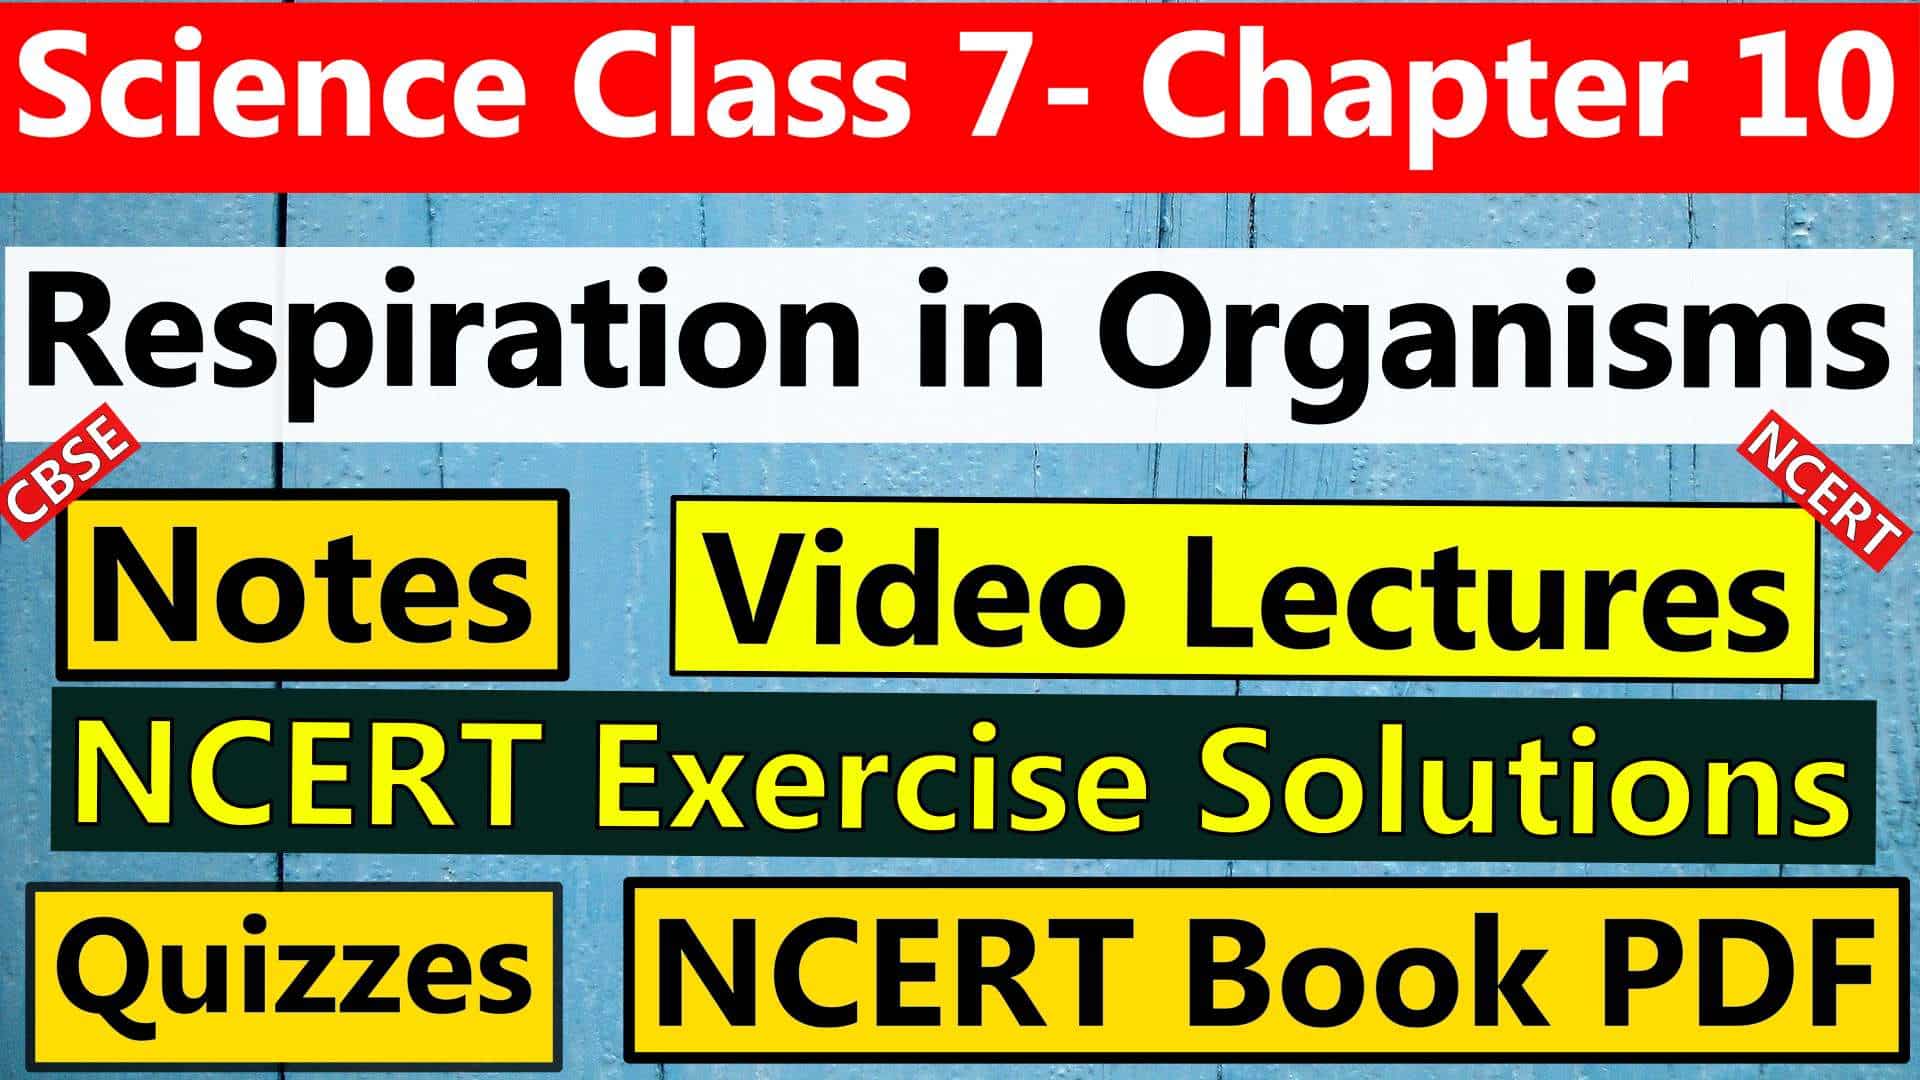 Science Class 7 Chapter 10 Respiration in Organisms